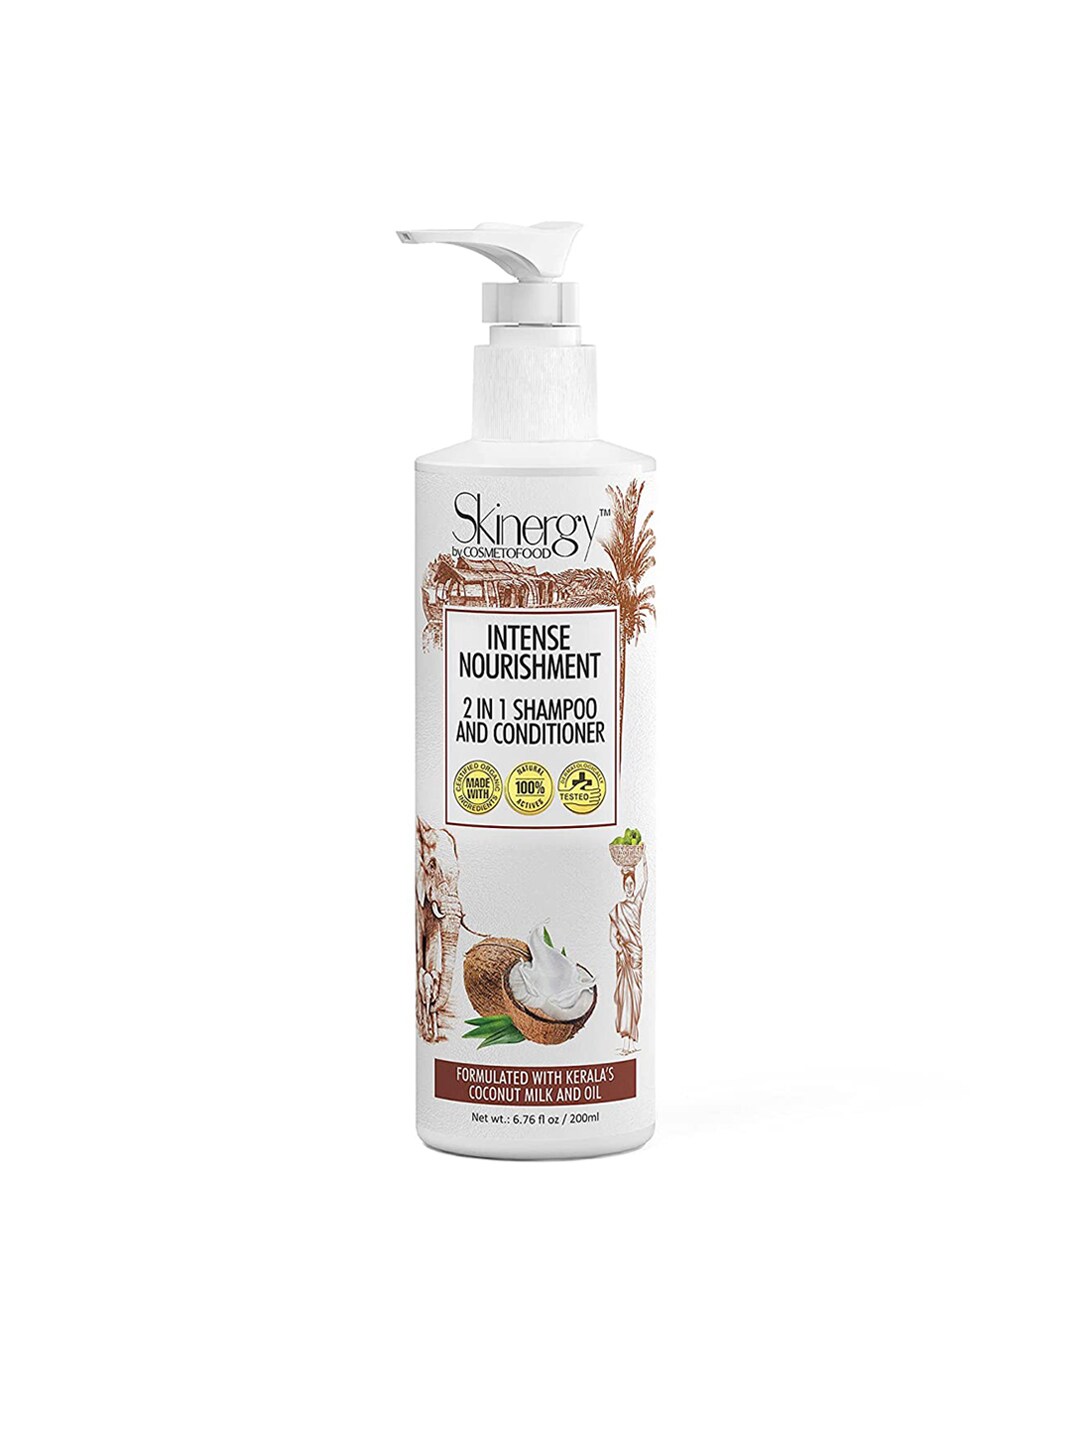 COSMETOFOOD Skinergy Intense Nourishment 2 in 1 Shampoo and Conditioner 200 ml Price in India